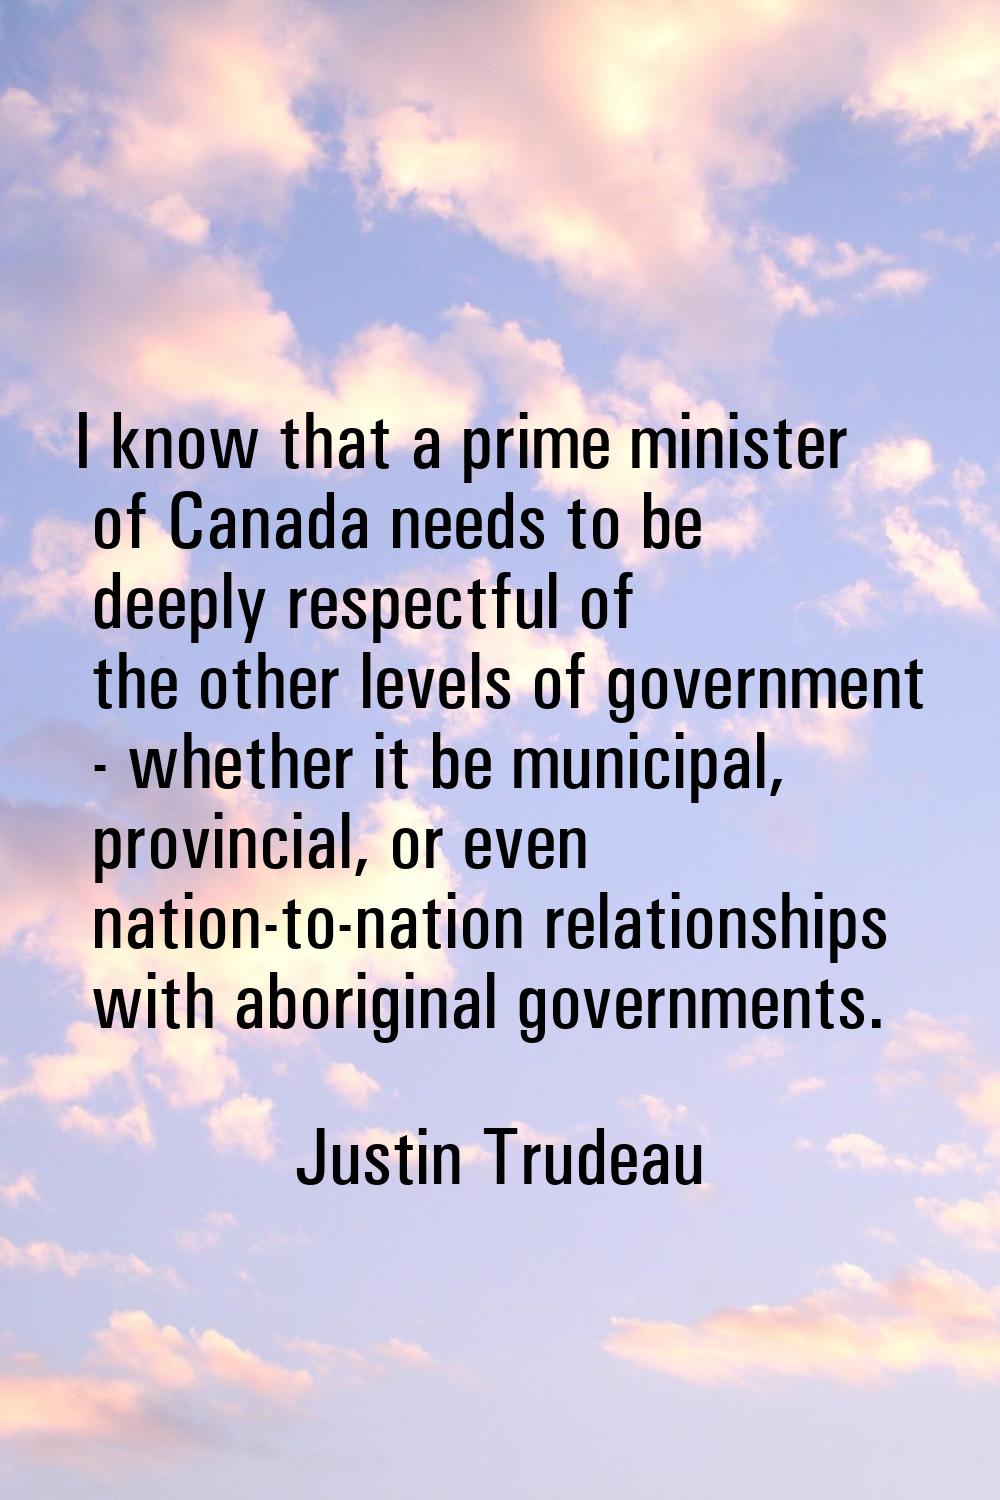 I know that a prime minister of Canada needs to be deeply respectful of the other levels of governm